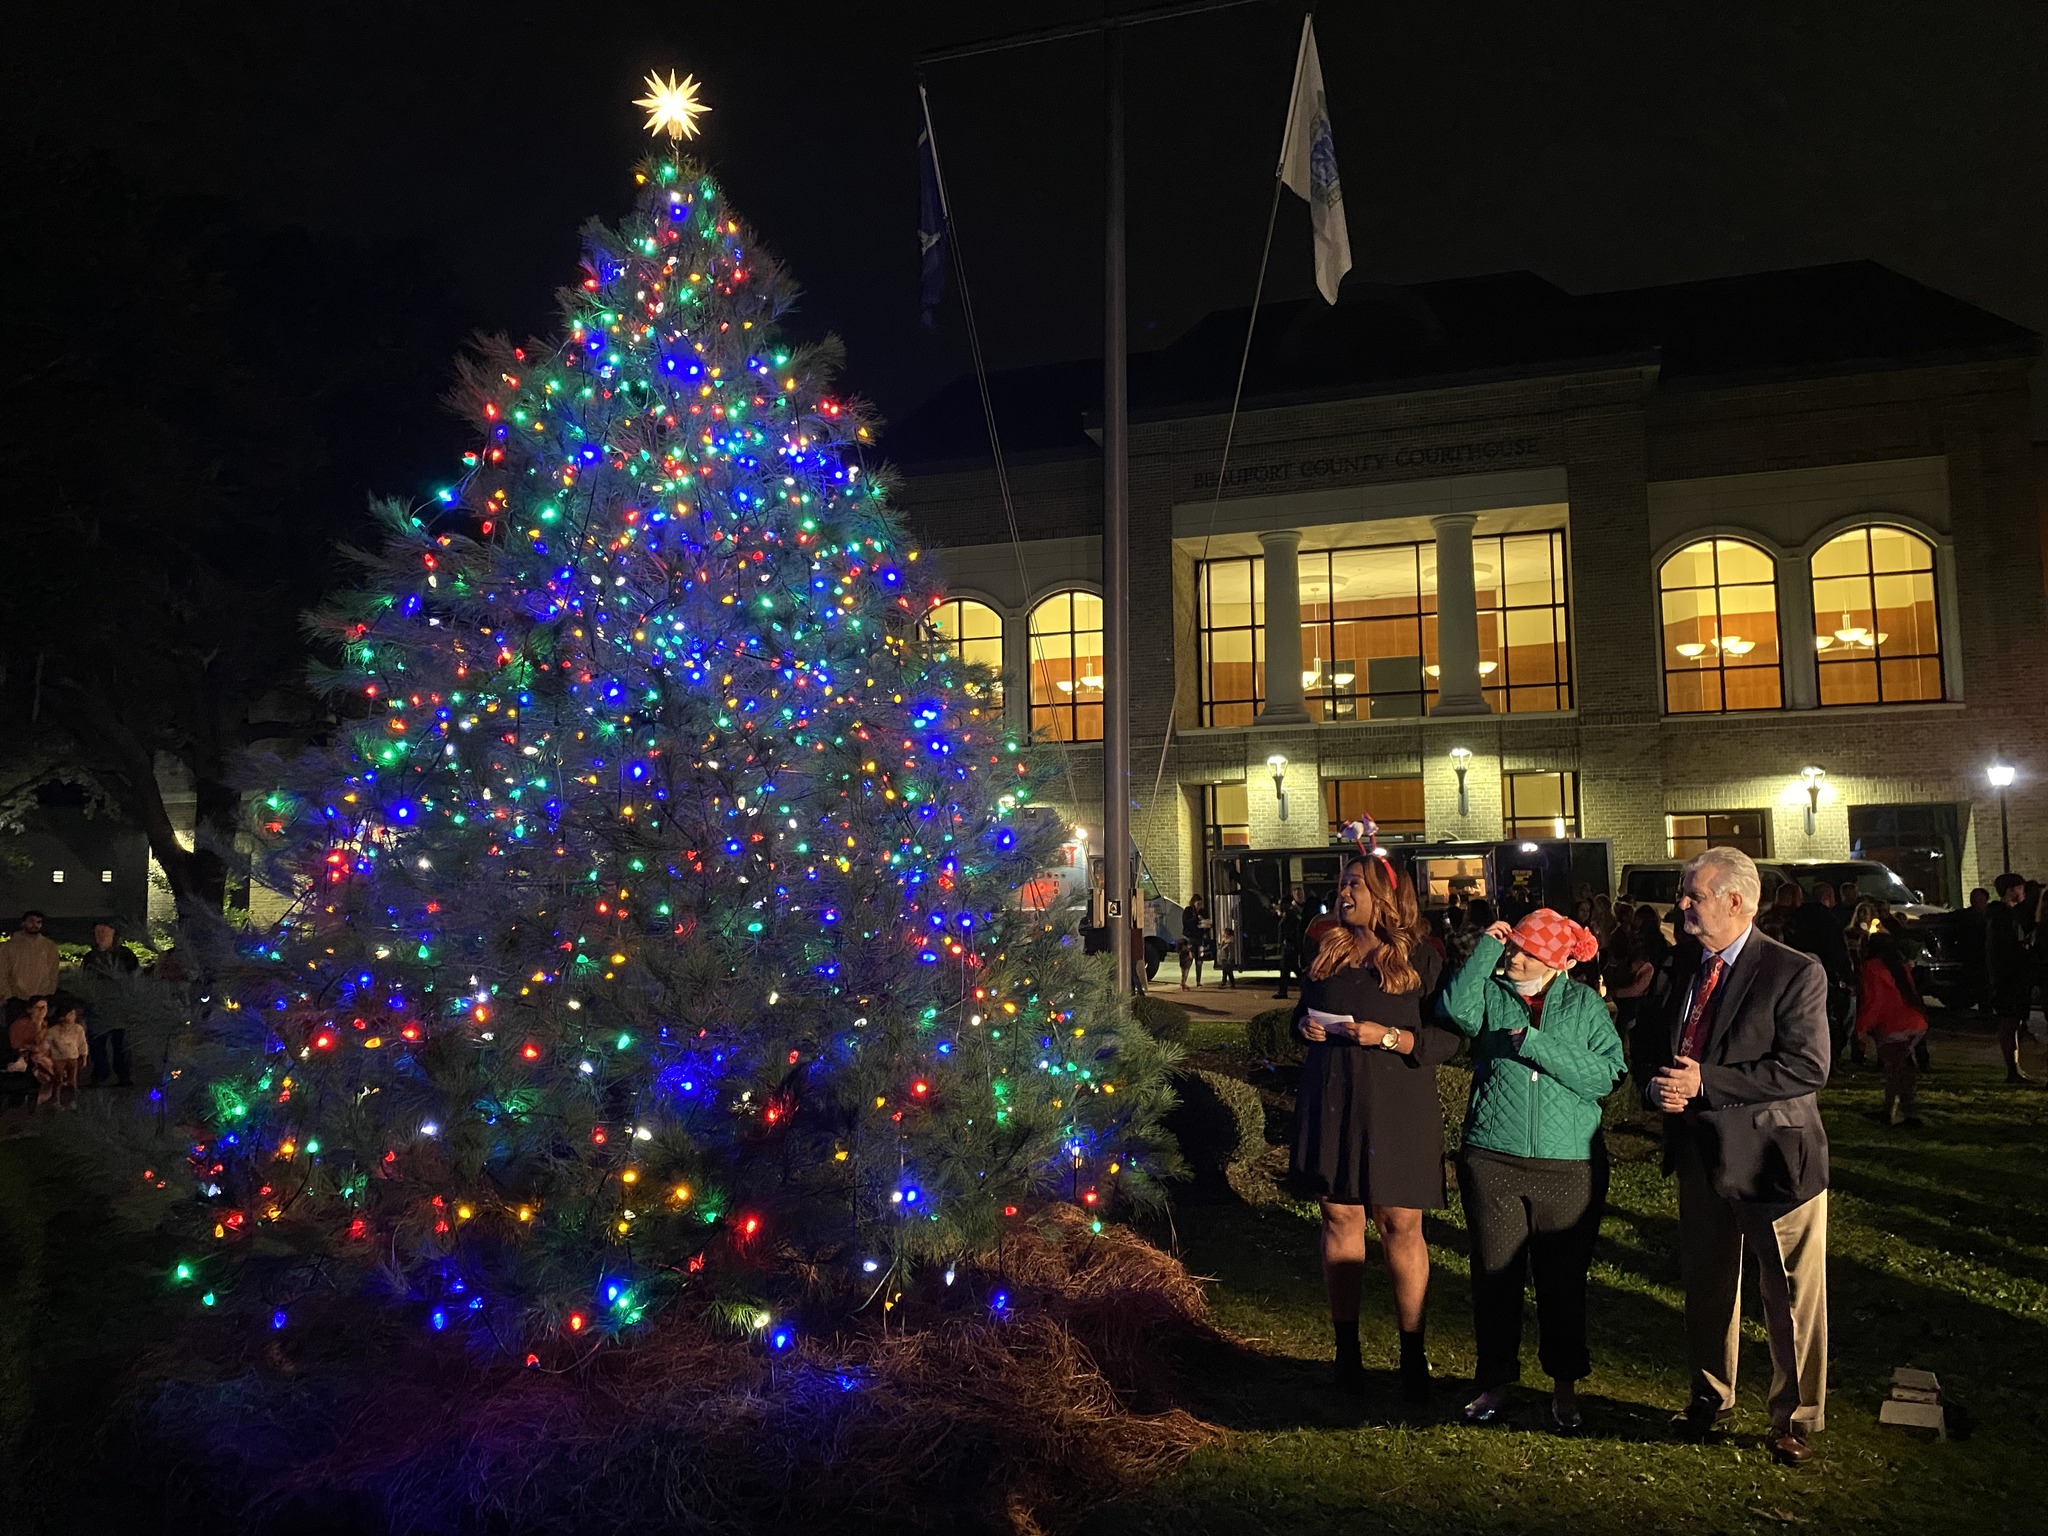 County Council and Community Christmas Tree Lighting to be Held Friday, December 8